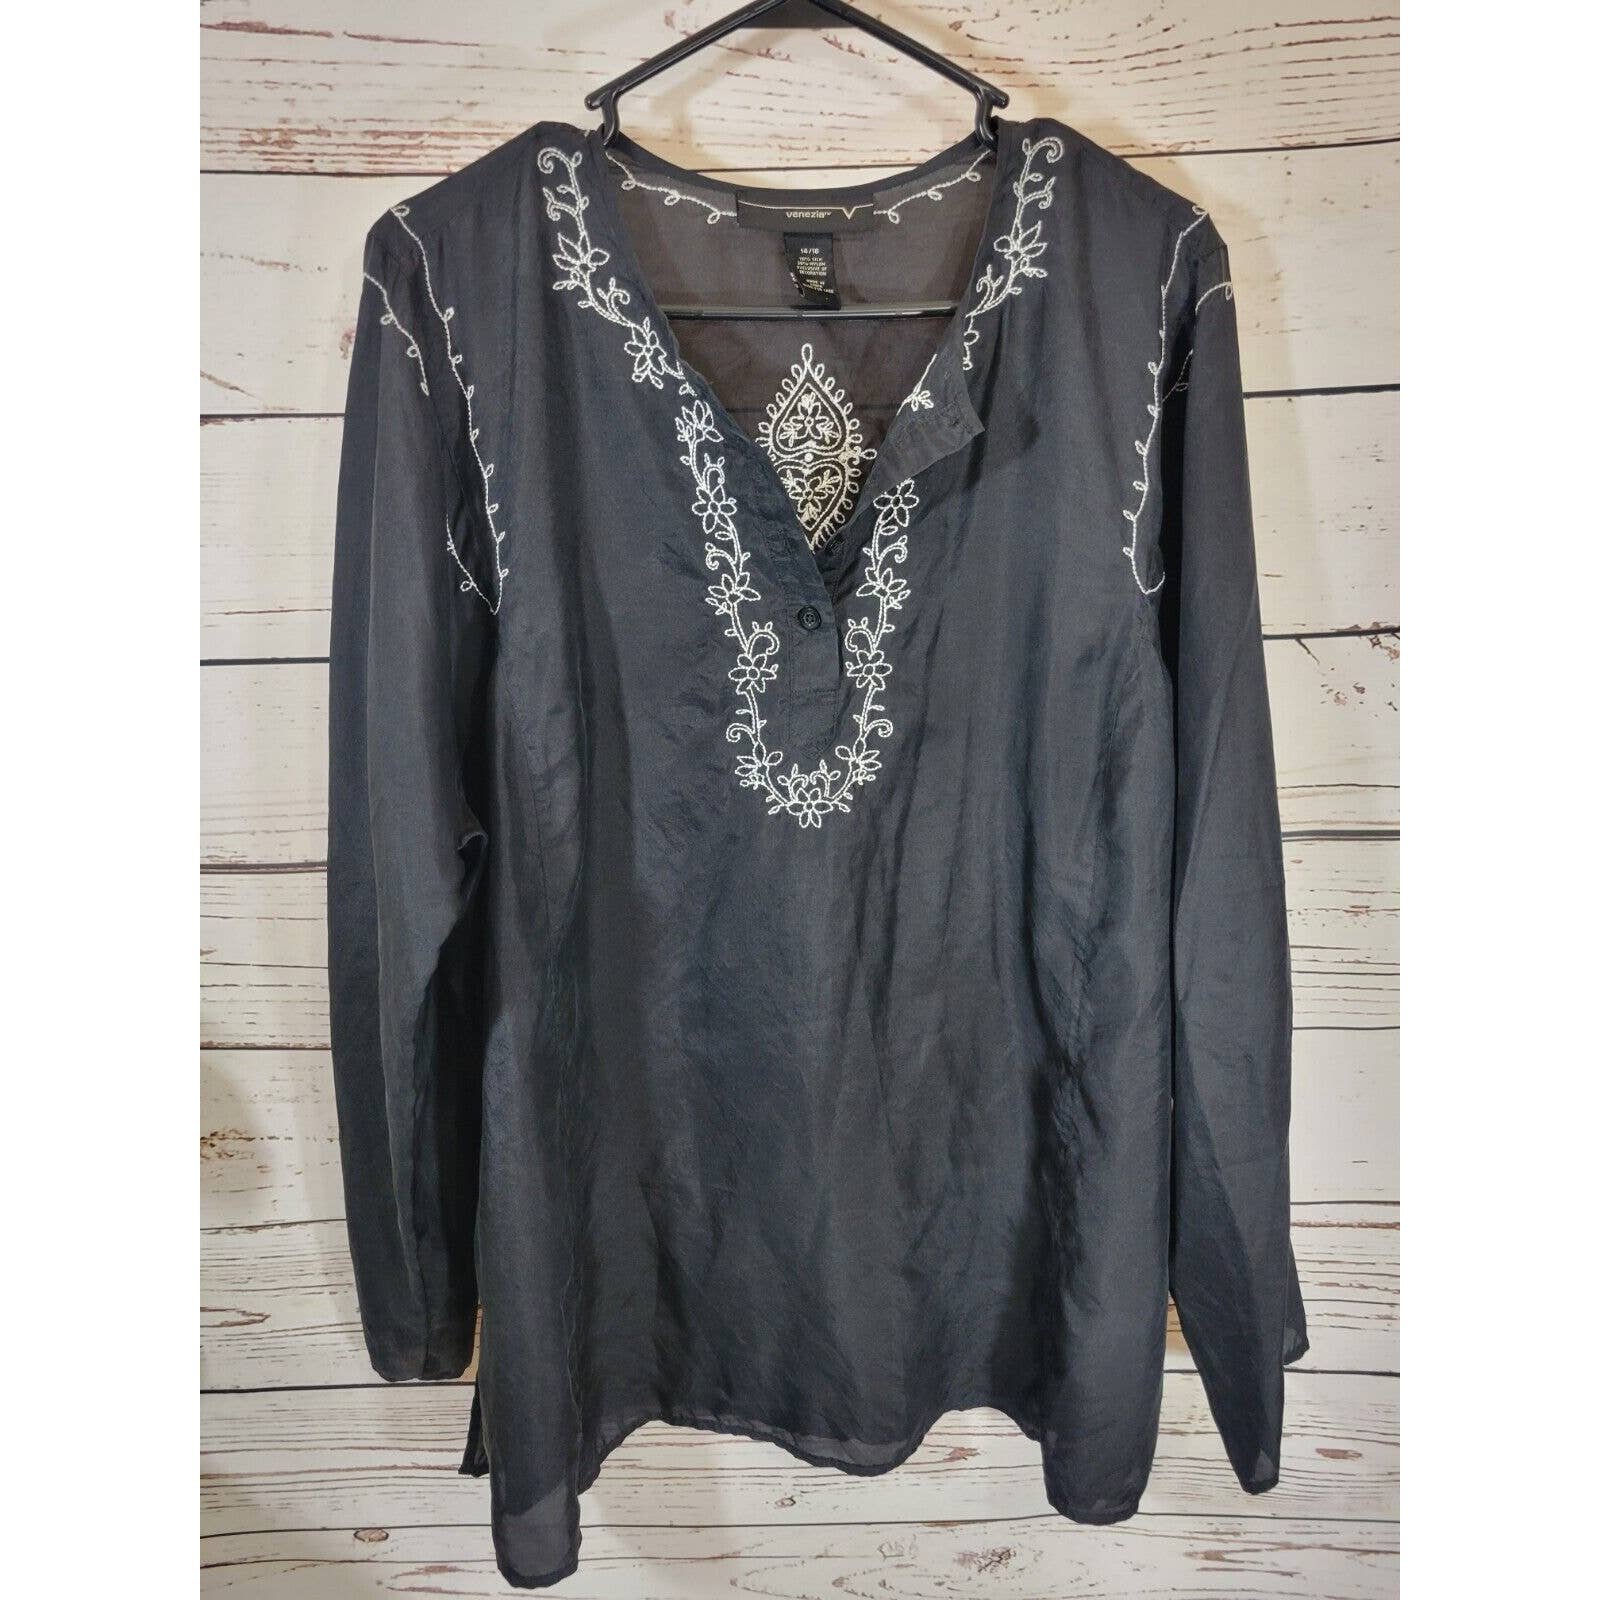 Venezia Black Floral Embroidered Henley Sheer Long Sleeve Top Women´s Size 14/16 JAHJY2VAo